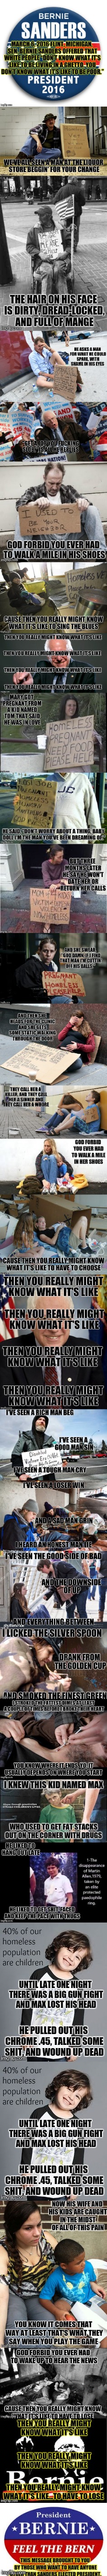 Everlast – What It's Like : Sorry it is so long. It kinda all needed to be said. | image tagged in bernie sanders,feel the bern,bernie 2016,homeless,song lyrics,election 2016 | made w/ Imgflip meme maker